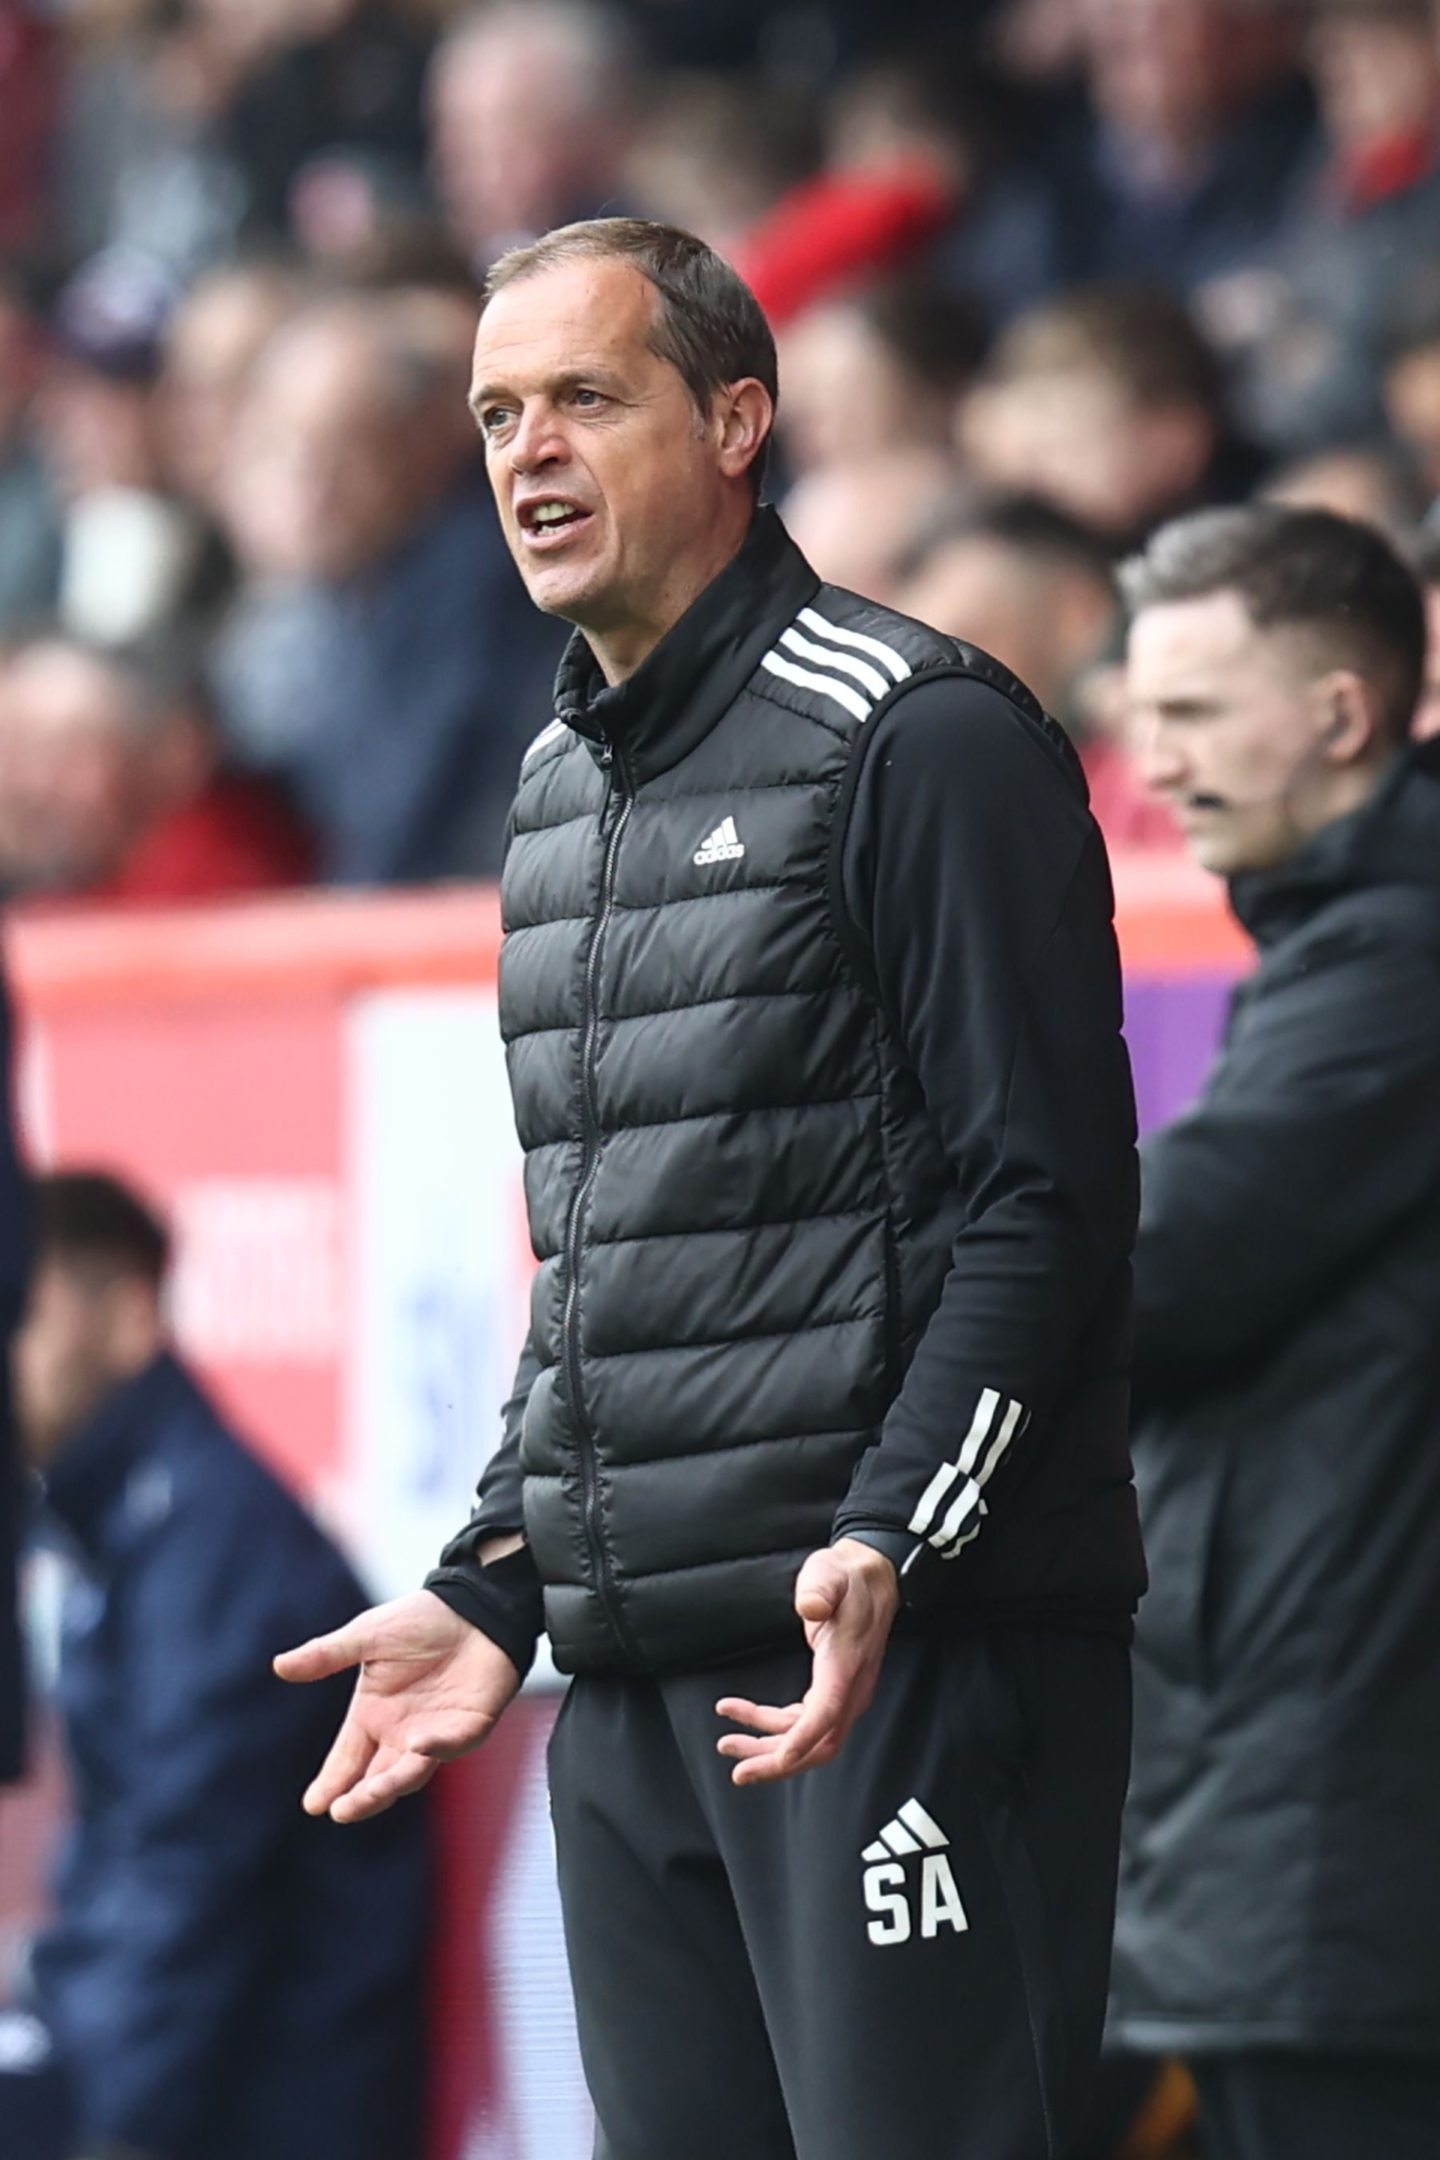 Aberdeen Coach Scott Anderson during the Premiership match against St Johnstone at Pittodrie. Image: Shutterstock 